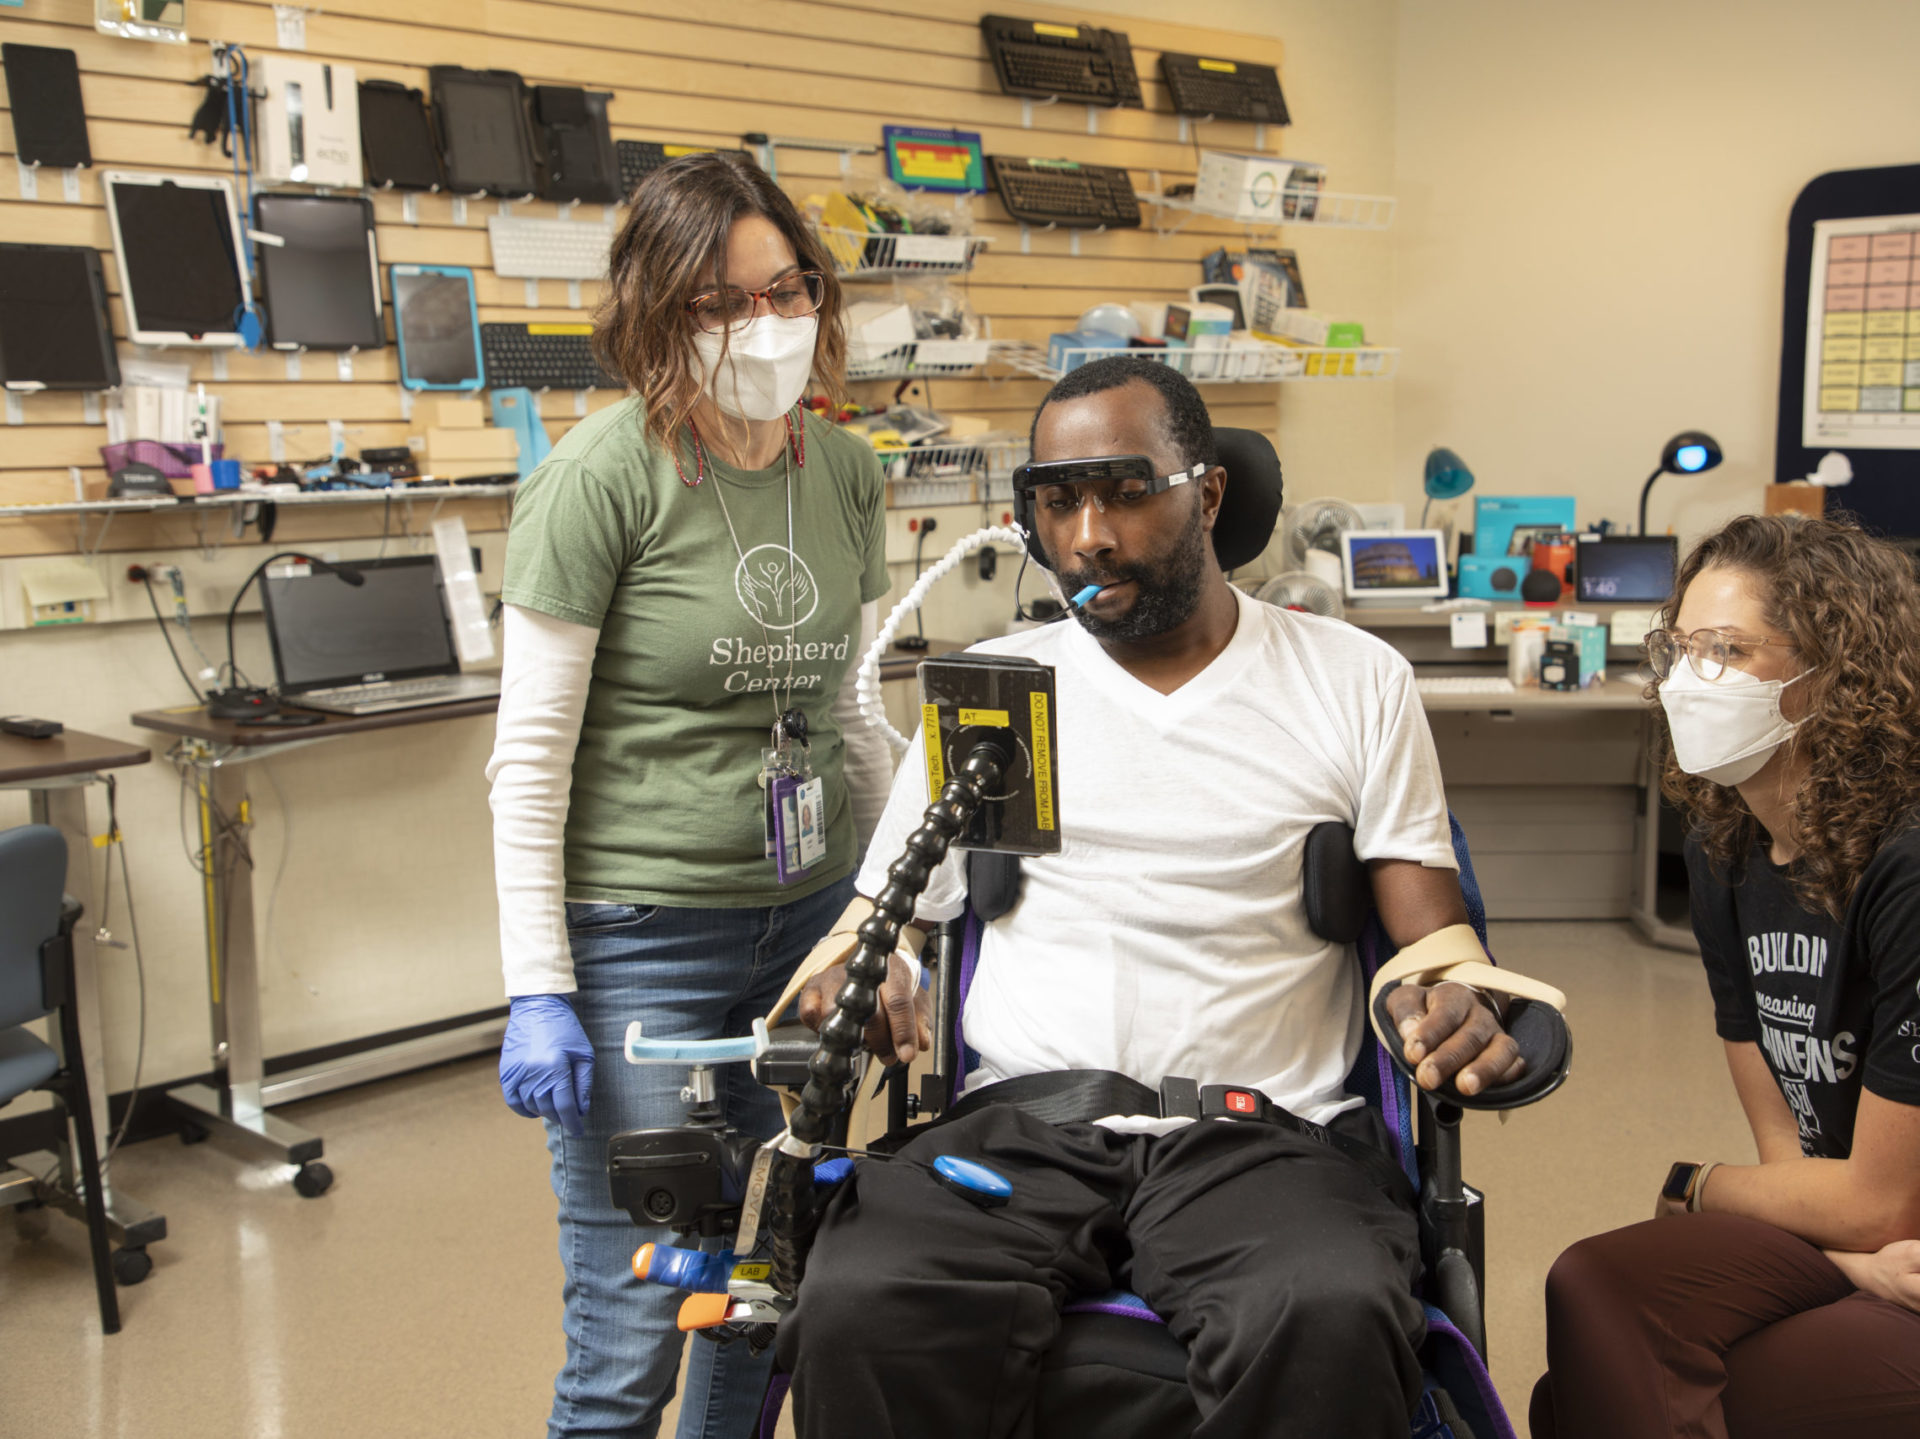 Shepherd staff assisting a patient with assistive technology device.